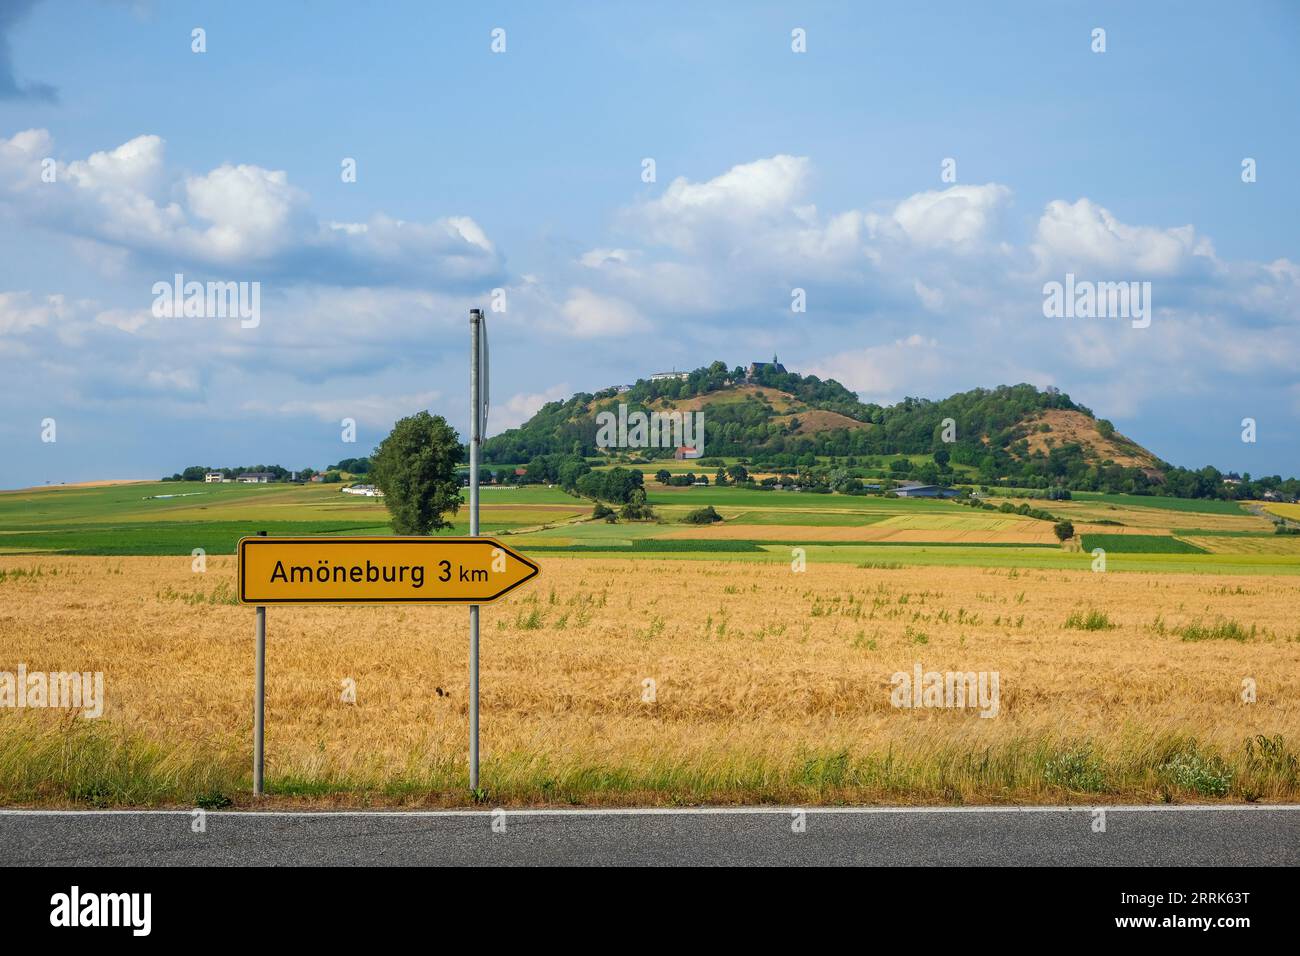 Amöneburg, Hesse, Germany - Country road to Amöneburg. Amöneburg is a small town in the central Hessian district of Marburg-Biedenkopf. It is located on the 365 m high mountain Amöneburg with the castle Amöneburg at the top. Stock Photo